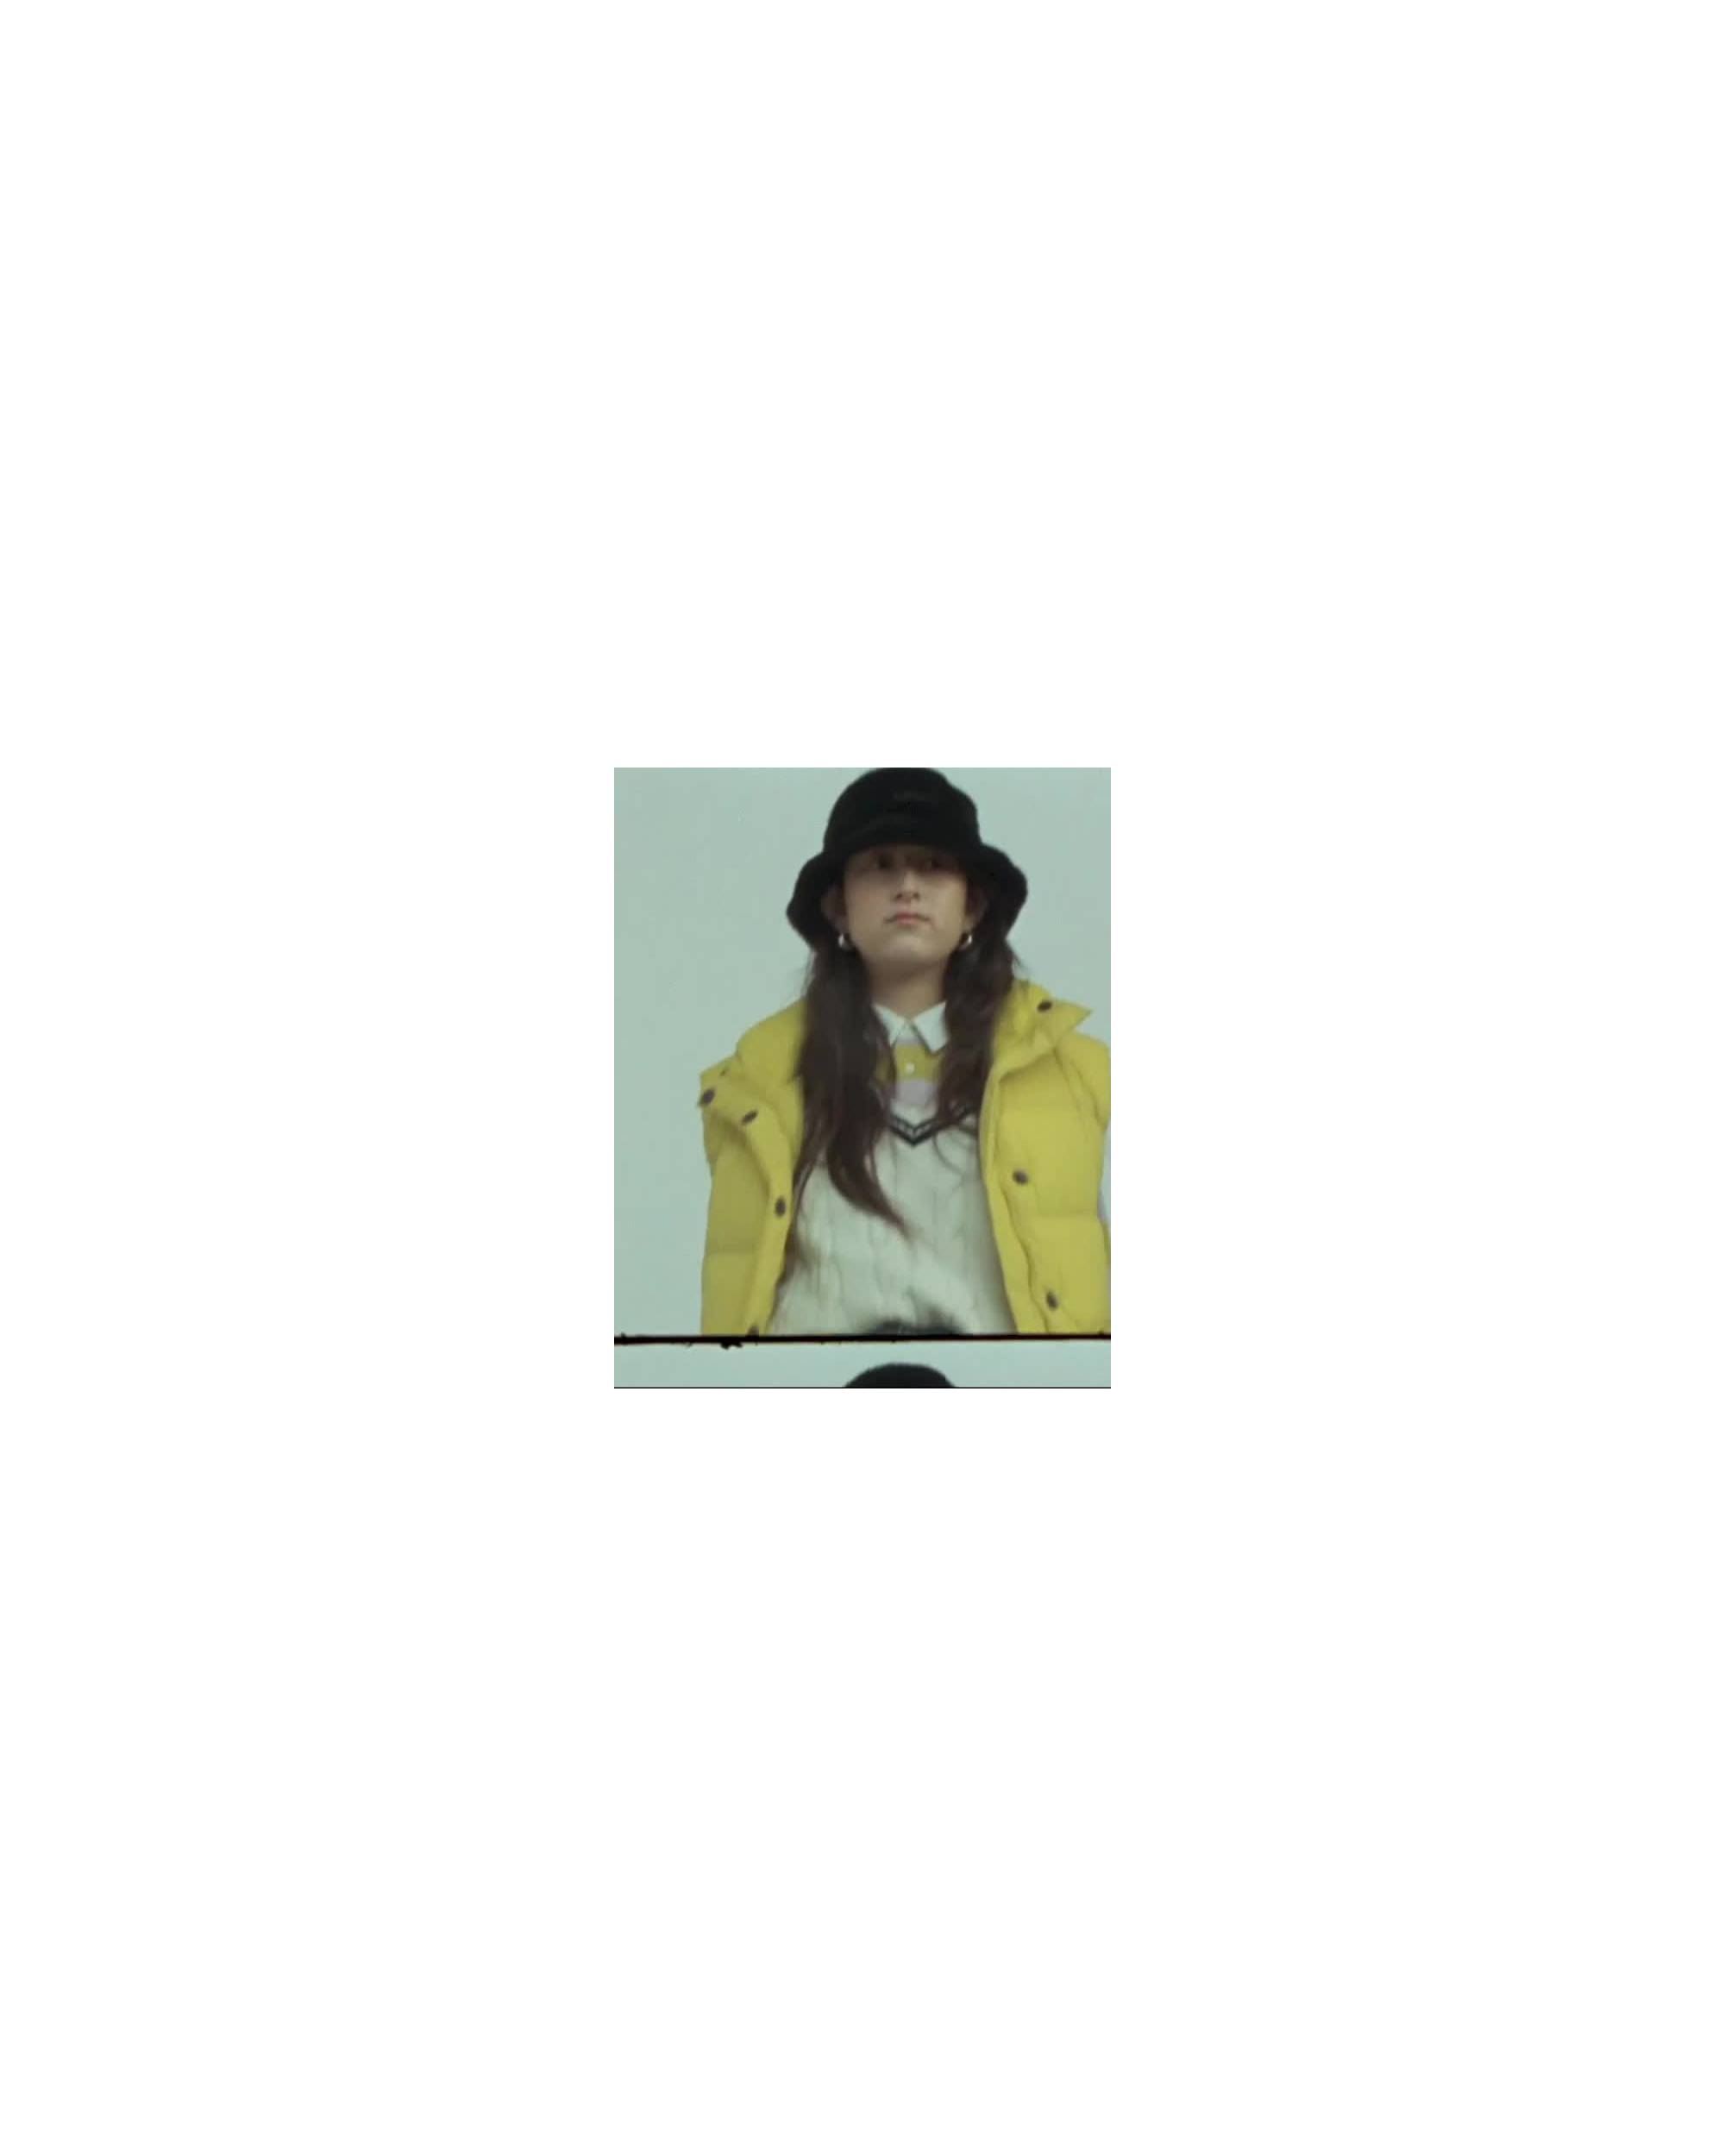 MP4 of woman wearing a yellow puffy jacket and a black bucket hat.